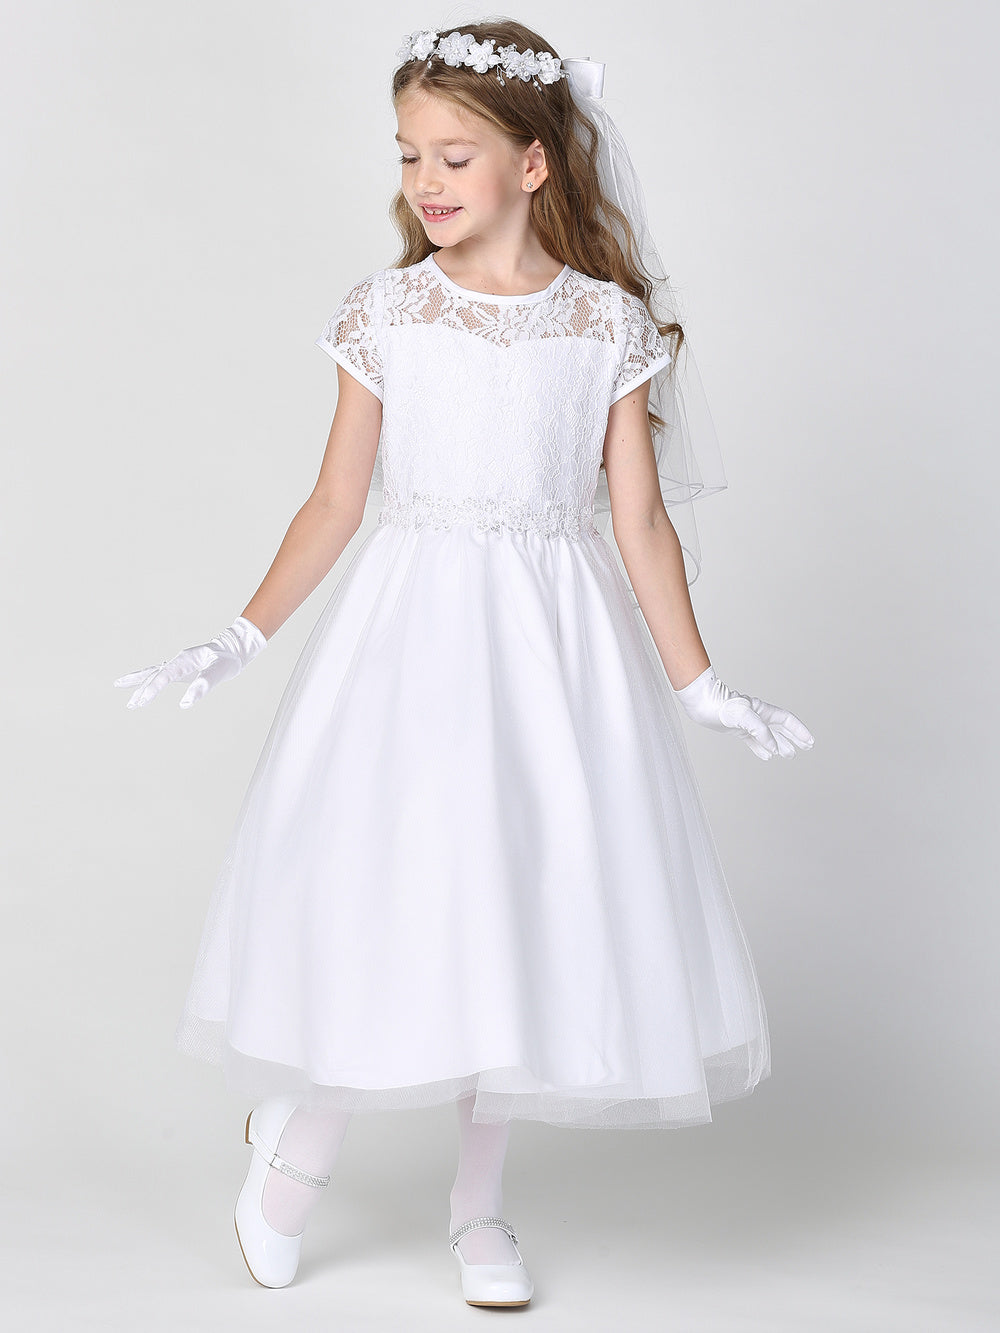 A girl wearing an elegant white First Communion Dress with a lace bodice and tulle skirt.